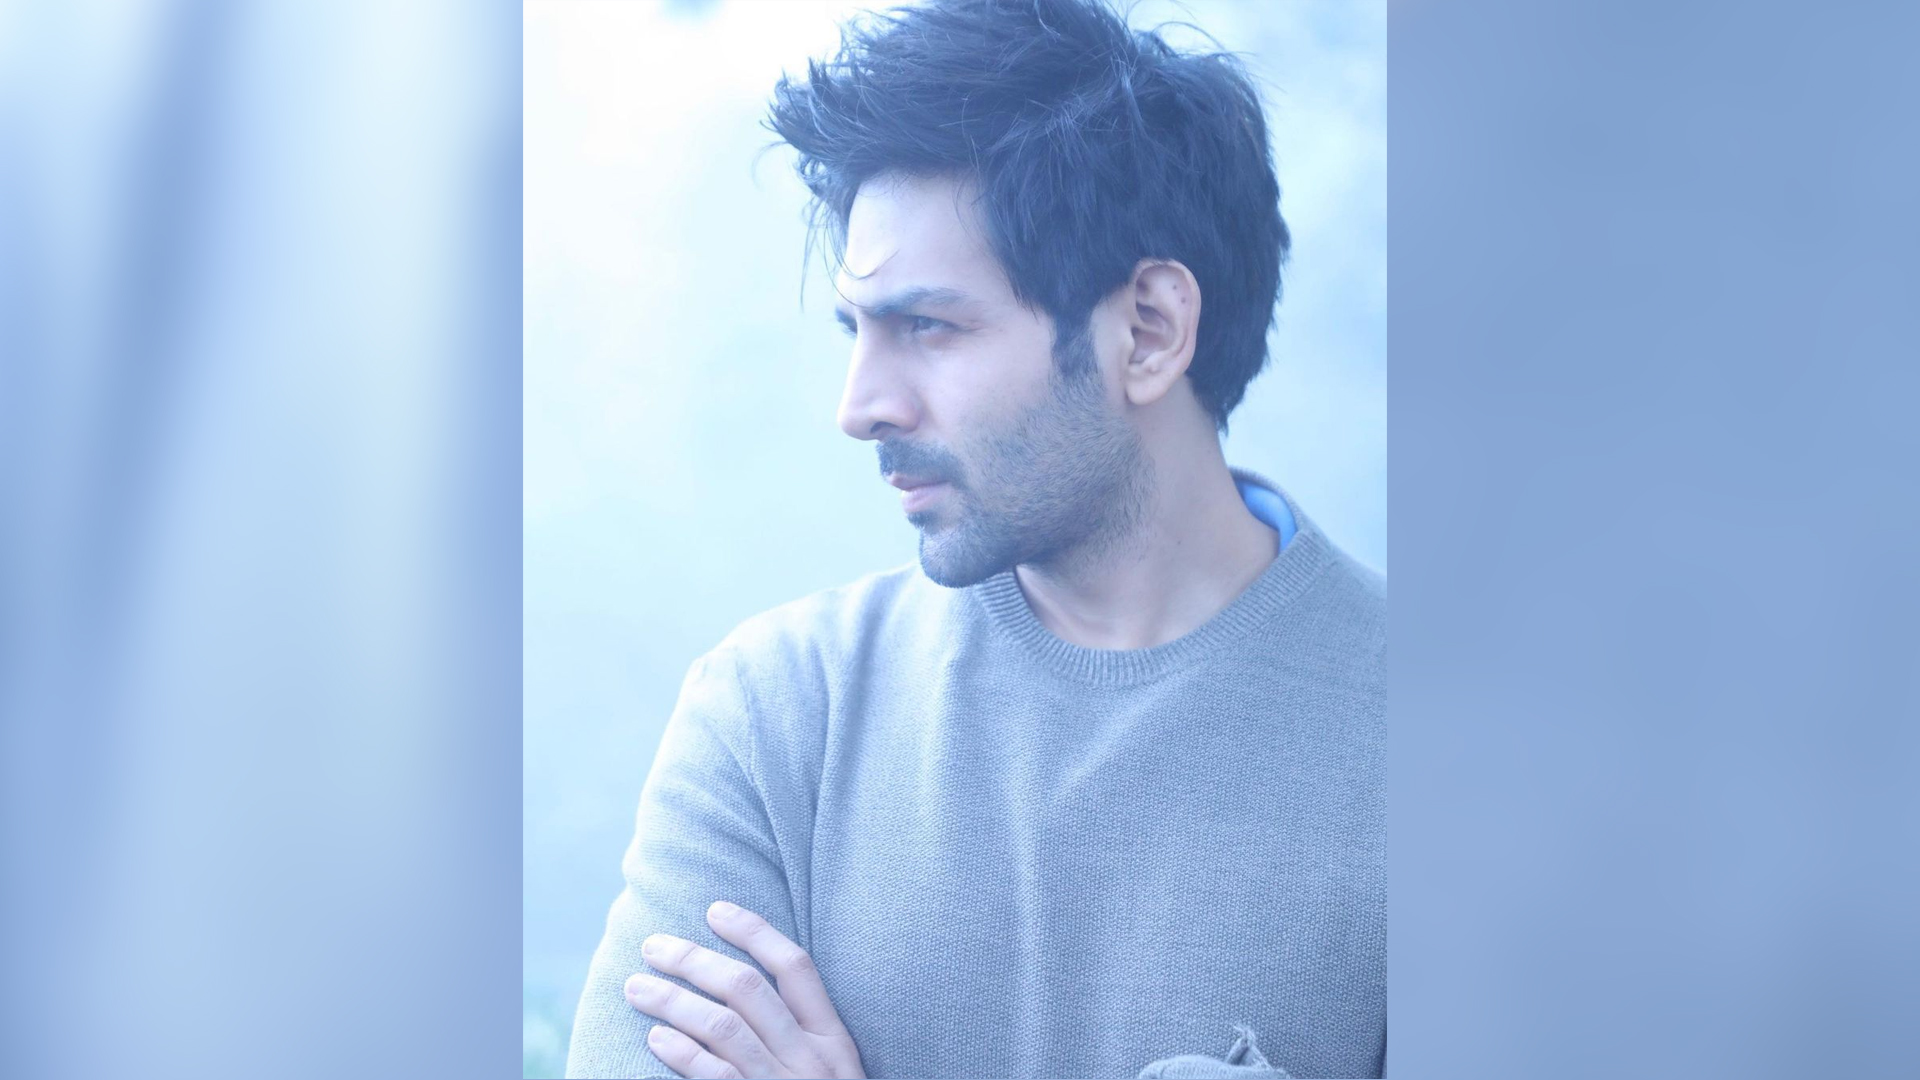 Spreading positivity through his thoughts, Kartik Aaryan shares a hot yet cute picture